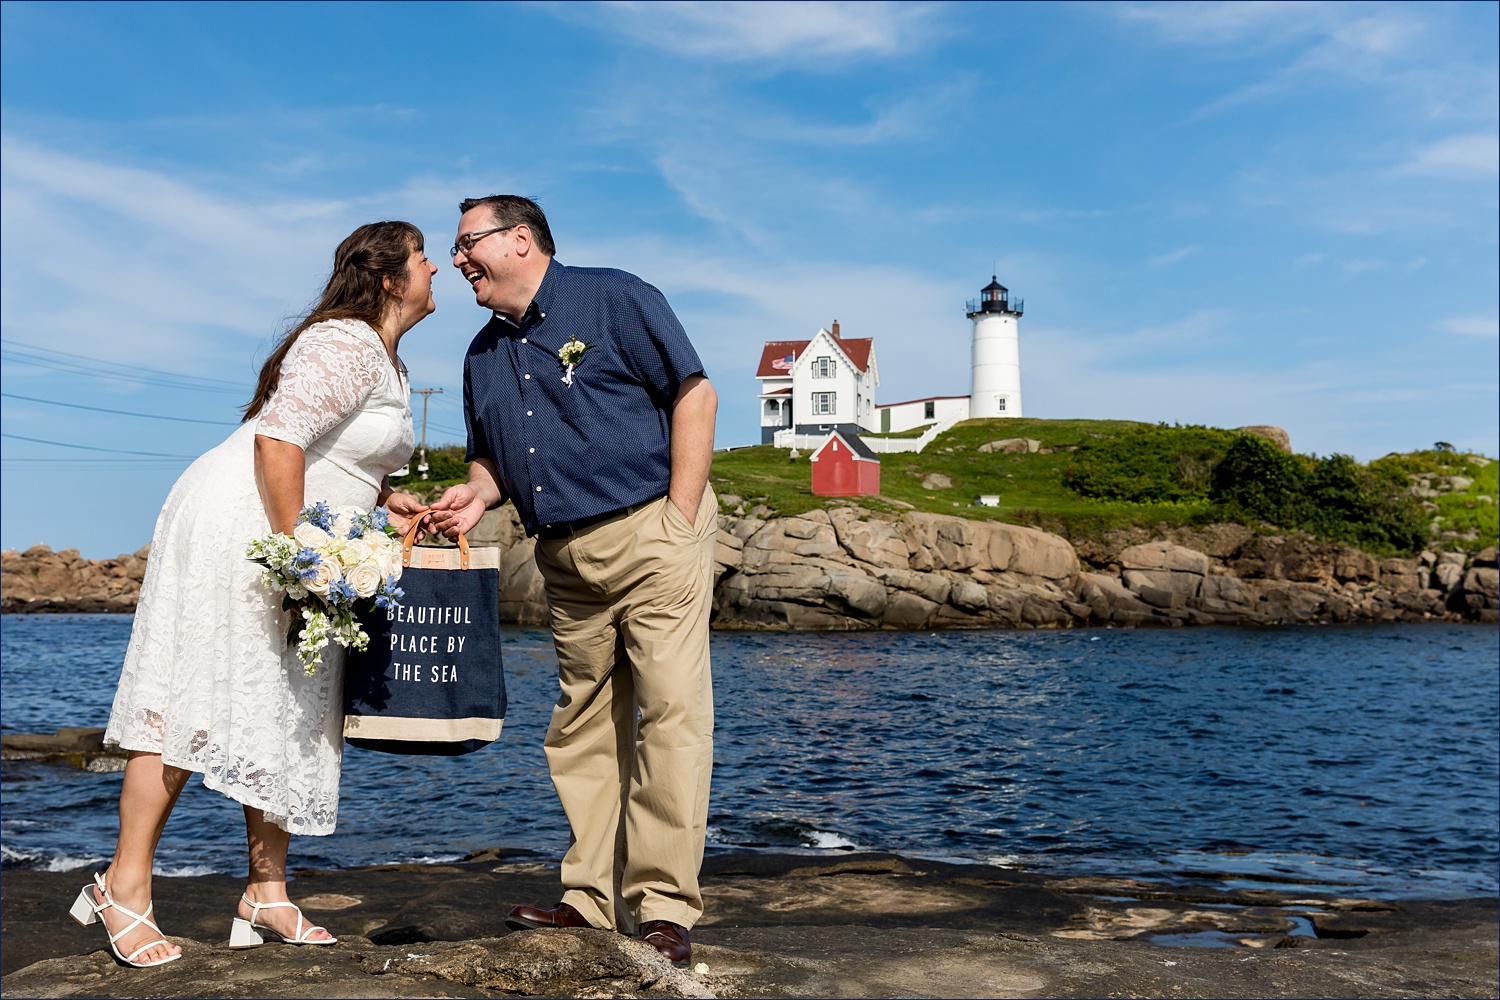 Leaning in for a kiss in front of the Nubble Light in York Maine